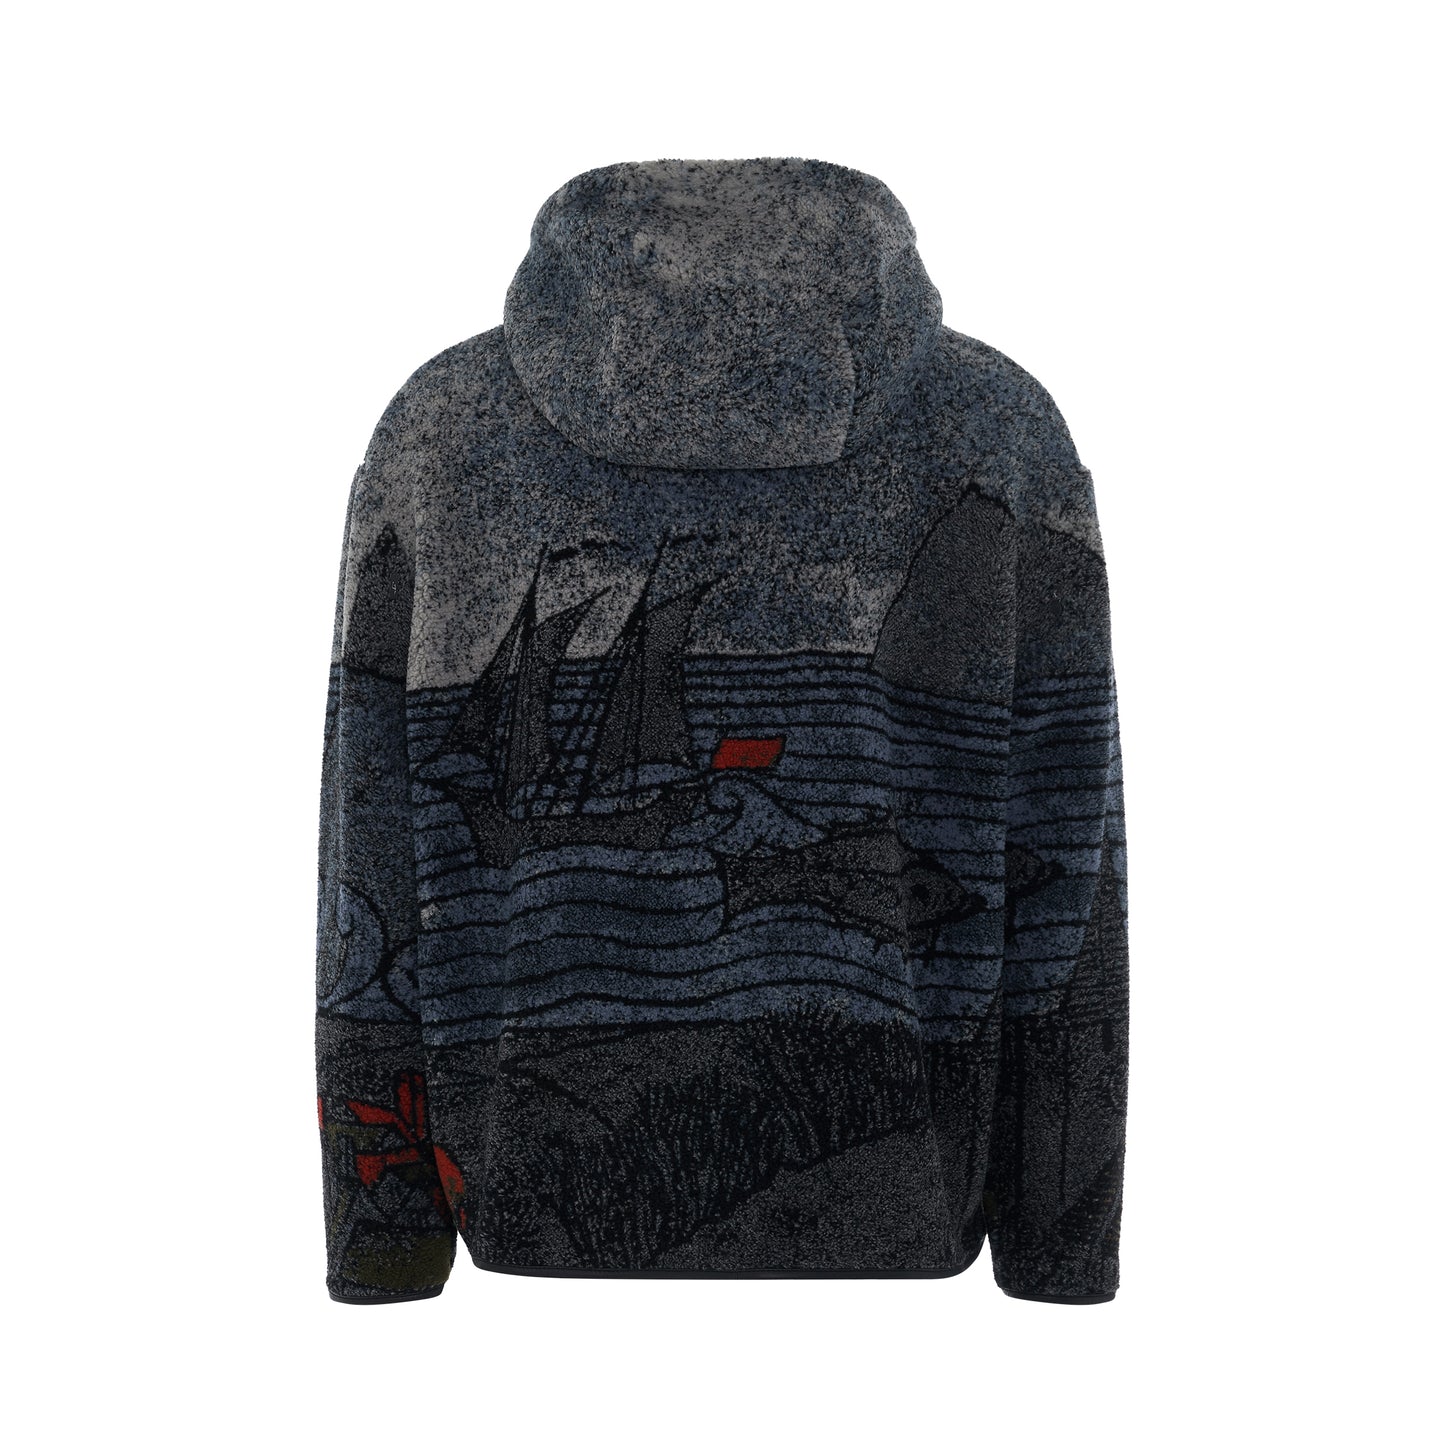 Lighthouse Jacket in Multicolor